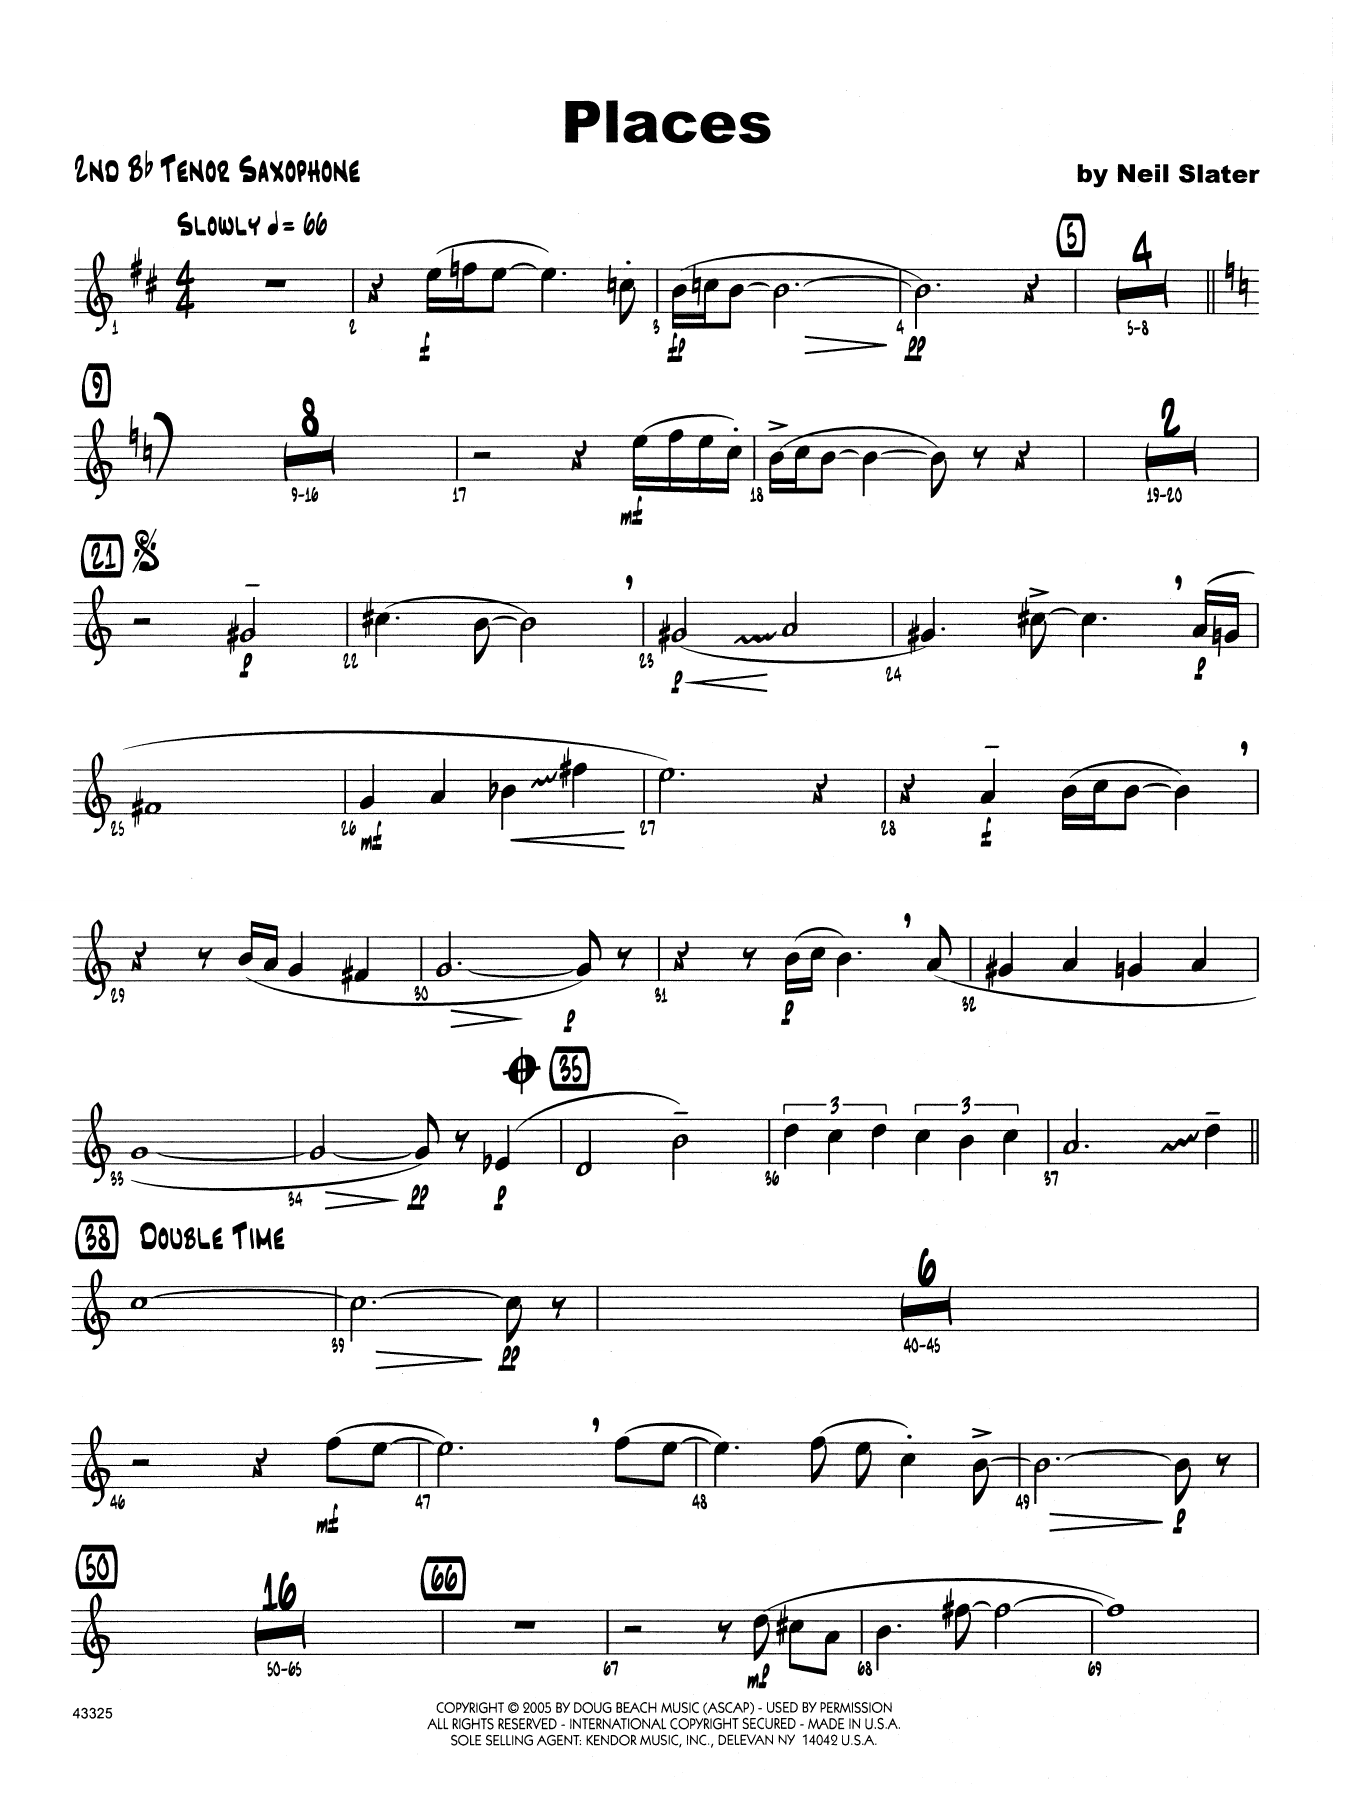 Download Neil Slater Places - 2nd Bb Tenor Saxophone Sheet Music